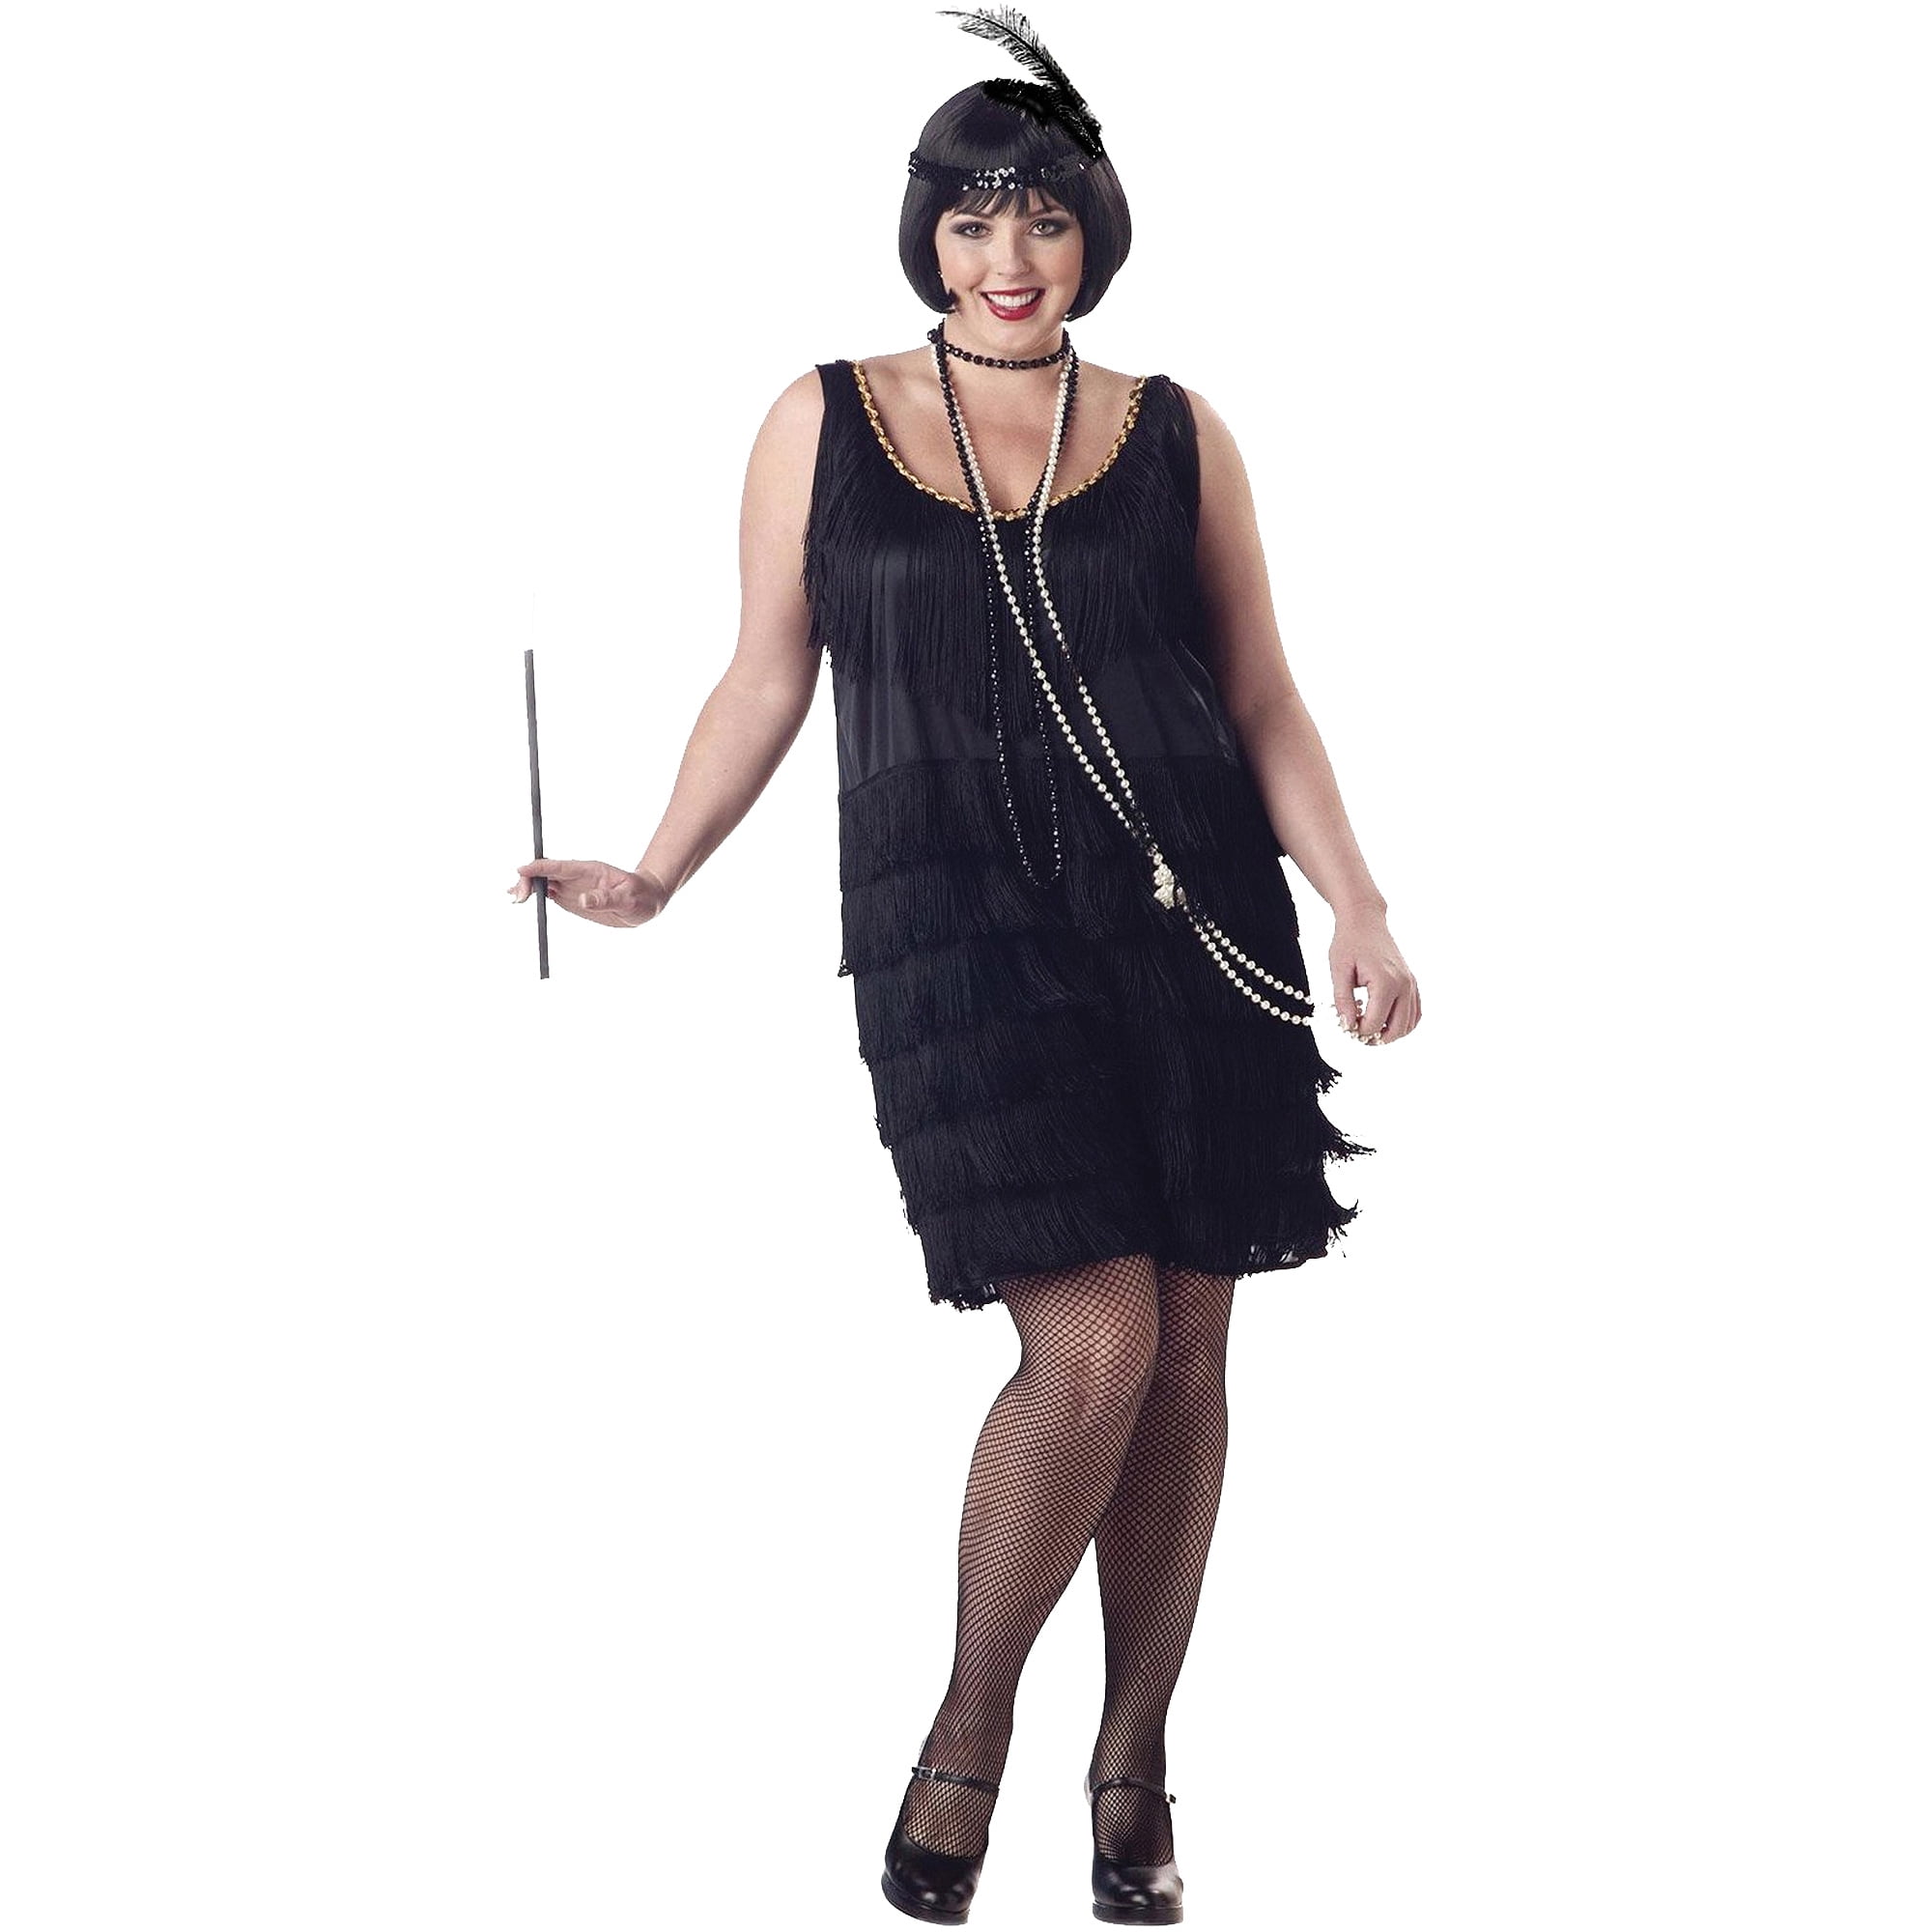 HAT AND PEARL NECKLACE. BLACK DRESS WOMEN'S  20'S GATSBY FANCY DRESS COSTUME 